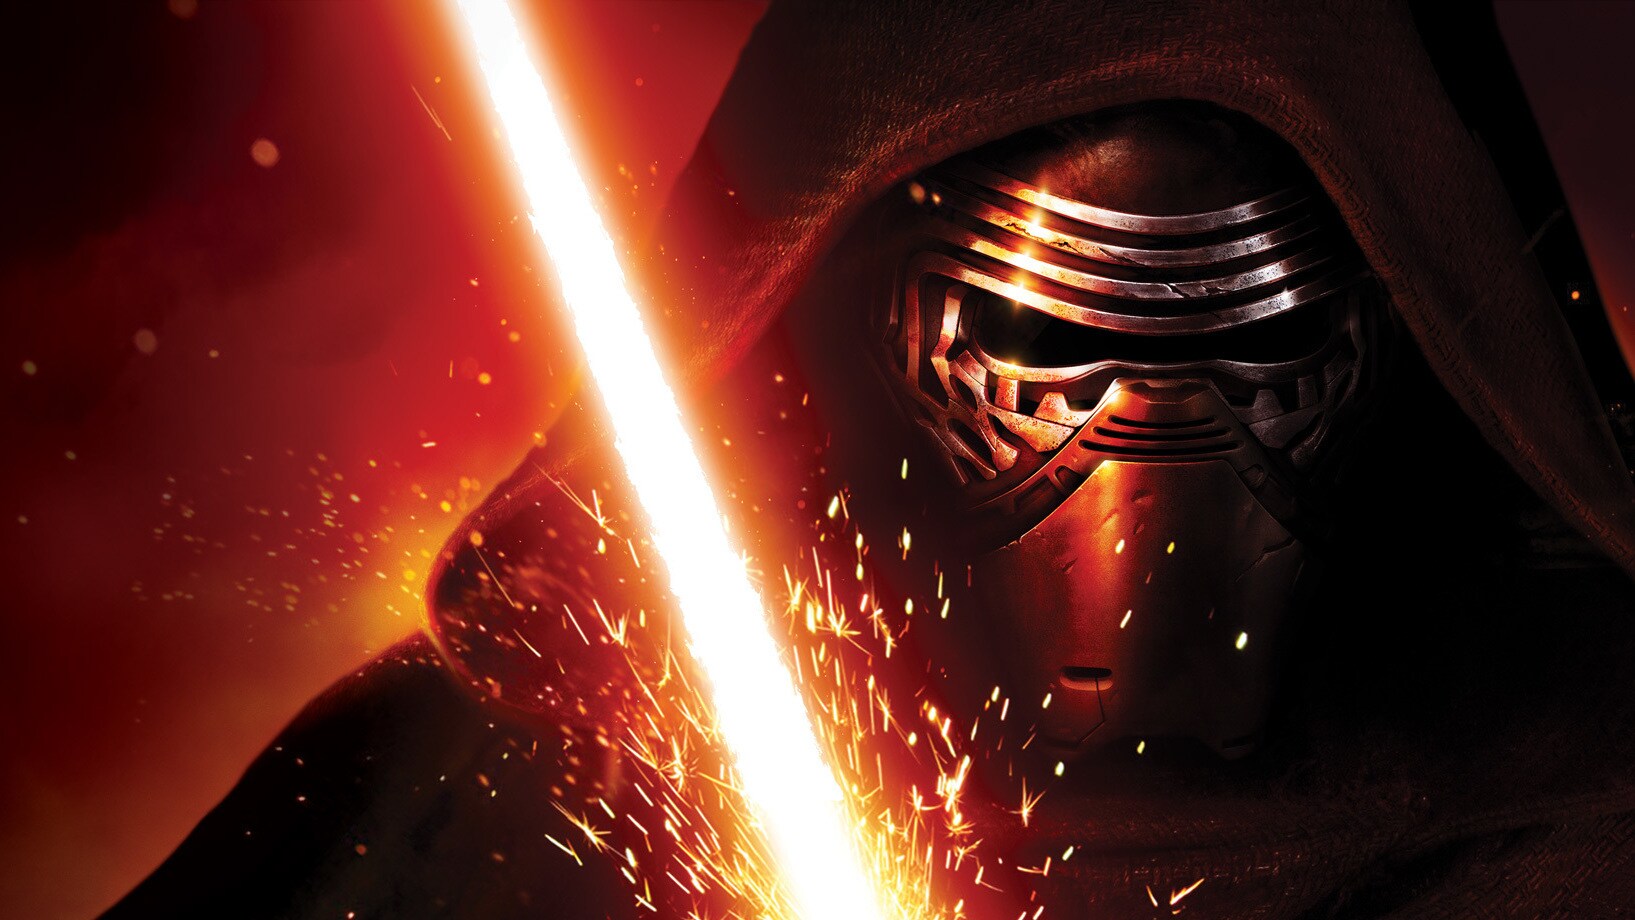 Star Wars: The Force Awakens Products to Arrive on ‘Force Friday,’ September 4